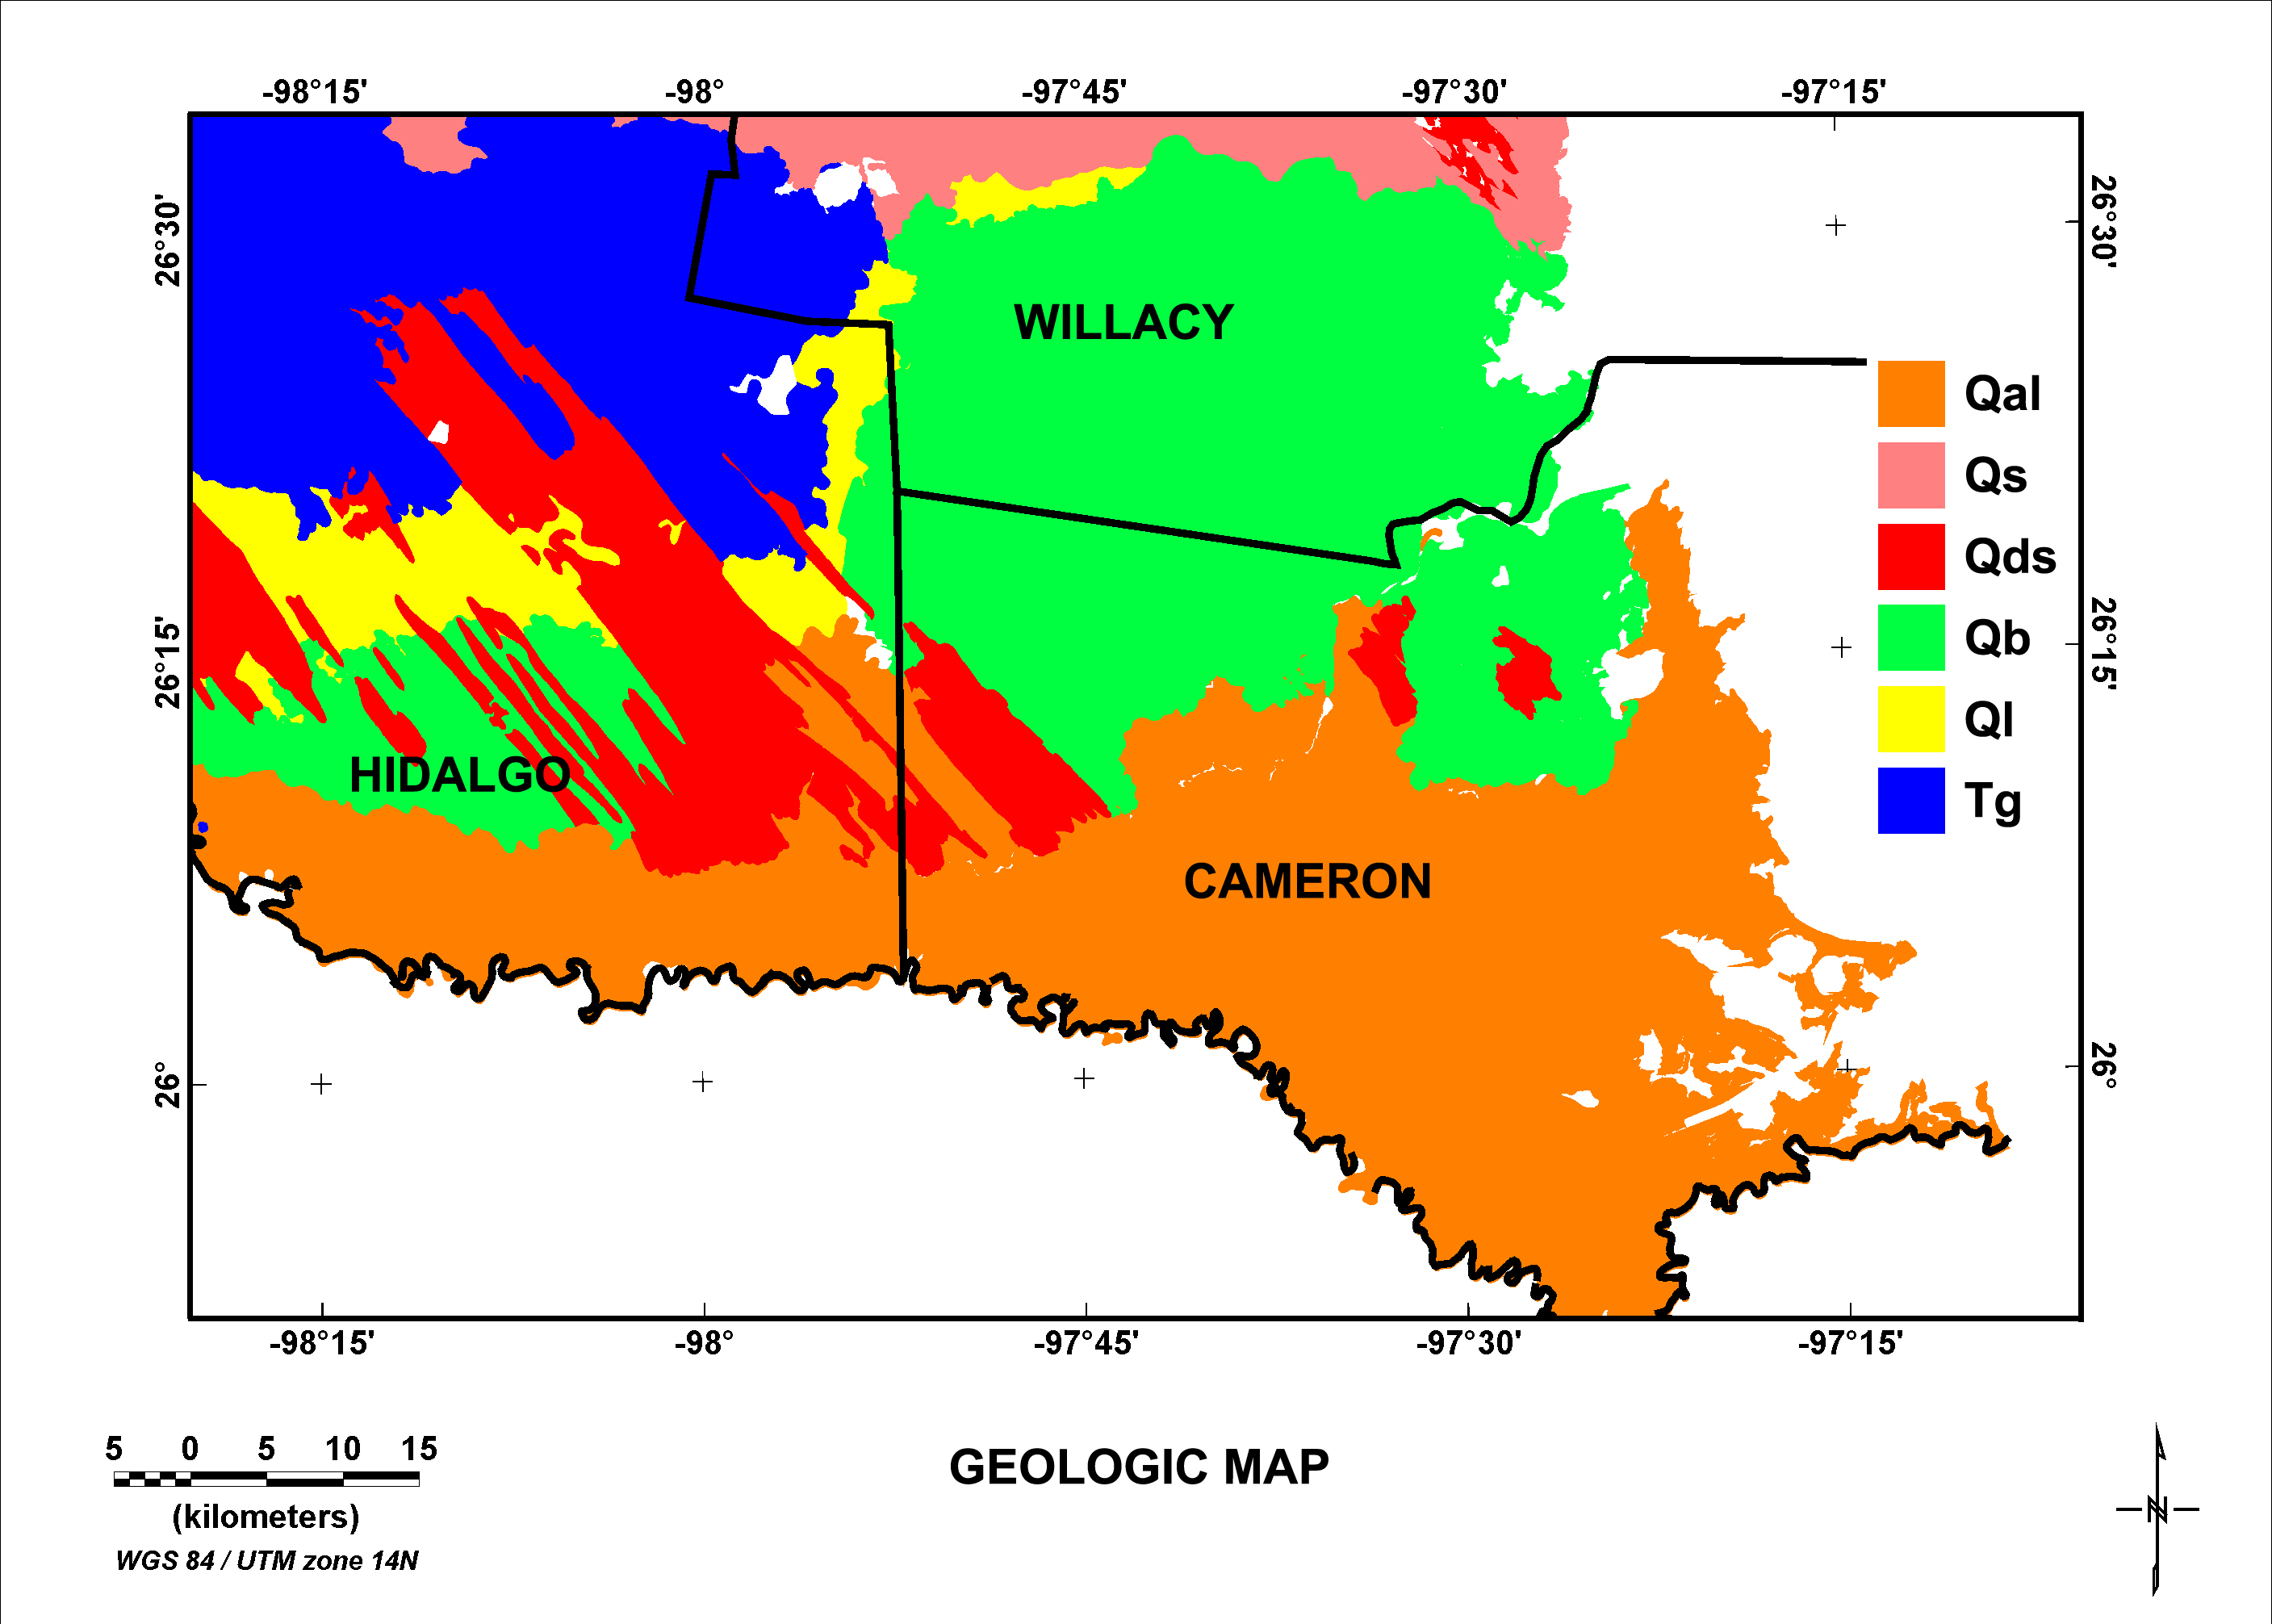 Image of the simplified geology of the lower Rio Grande Valley